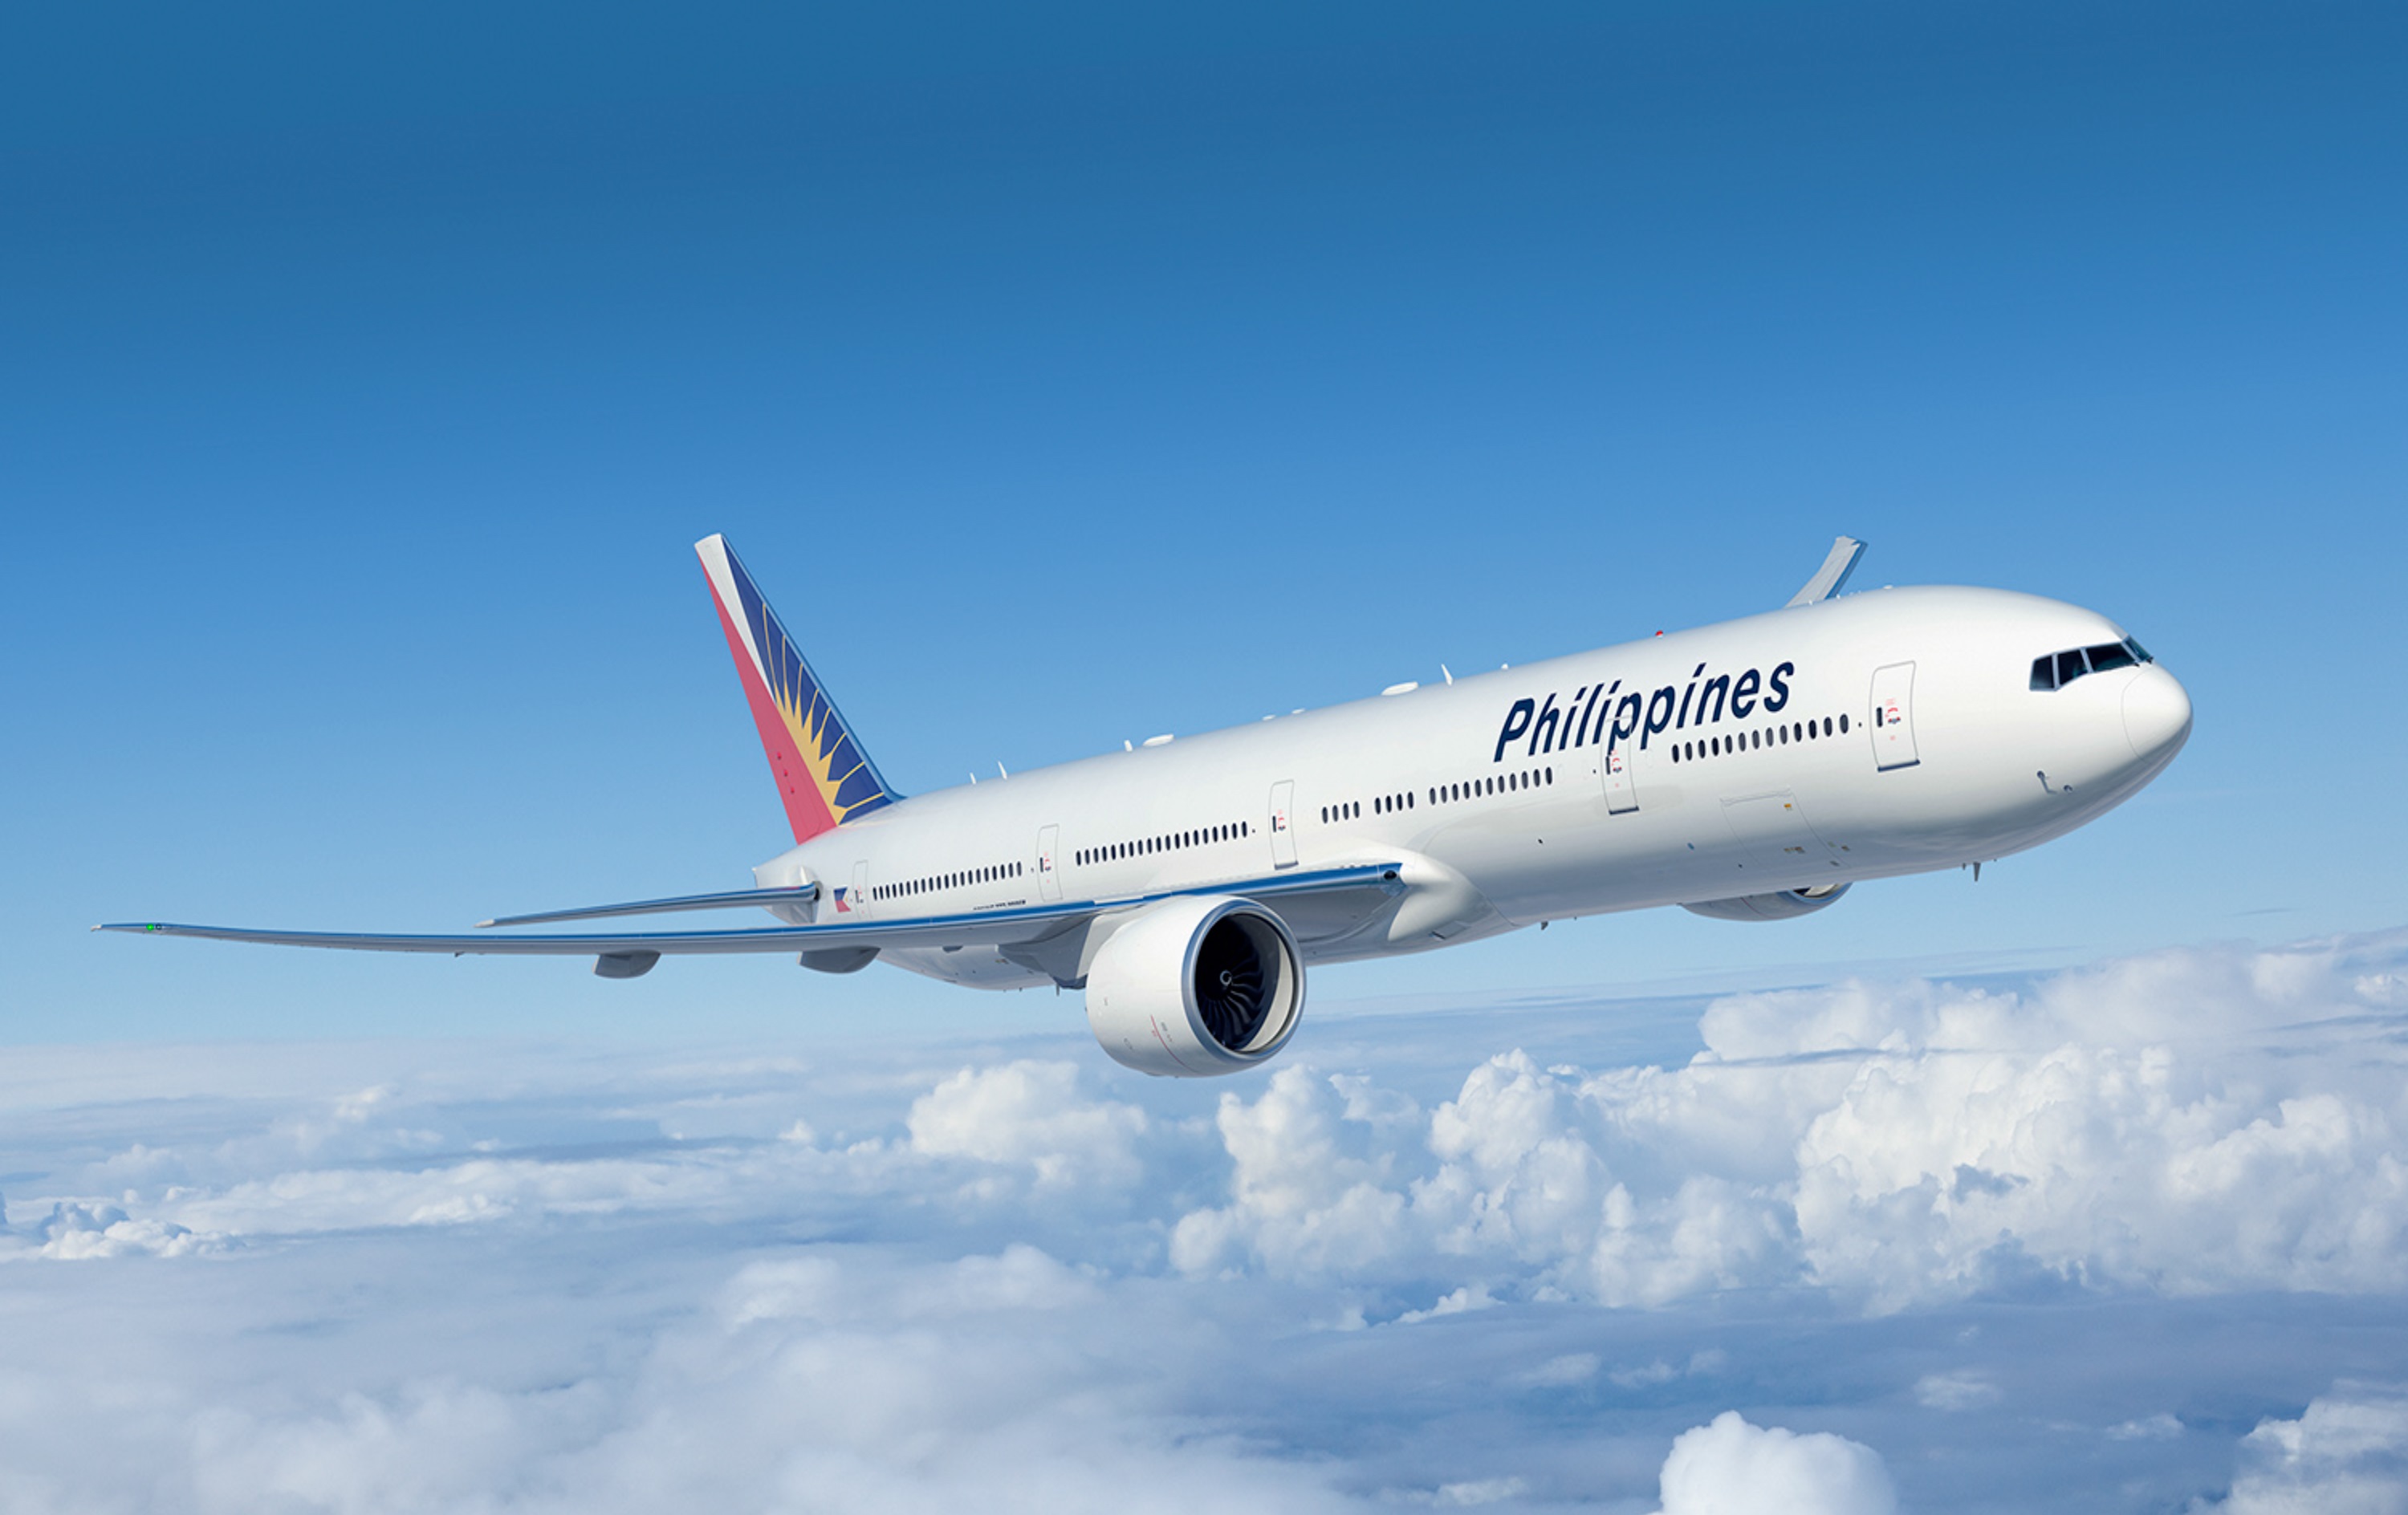 Philippine Airlines flight from Vancouver, Canada to Manila, Philippines